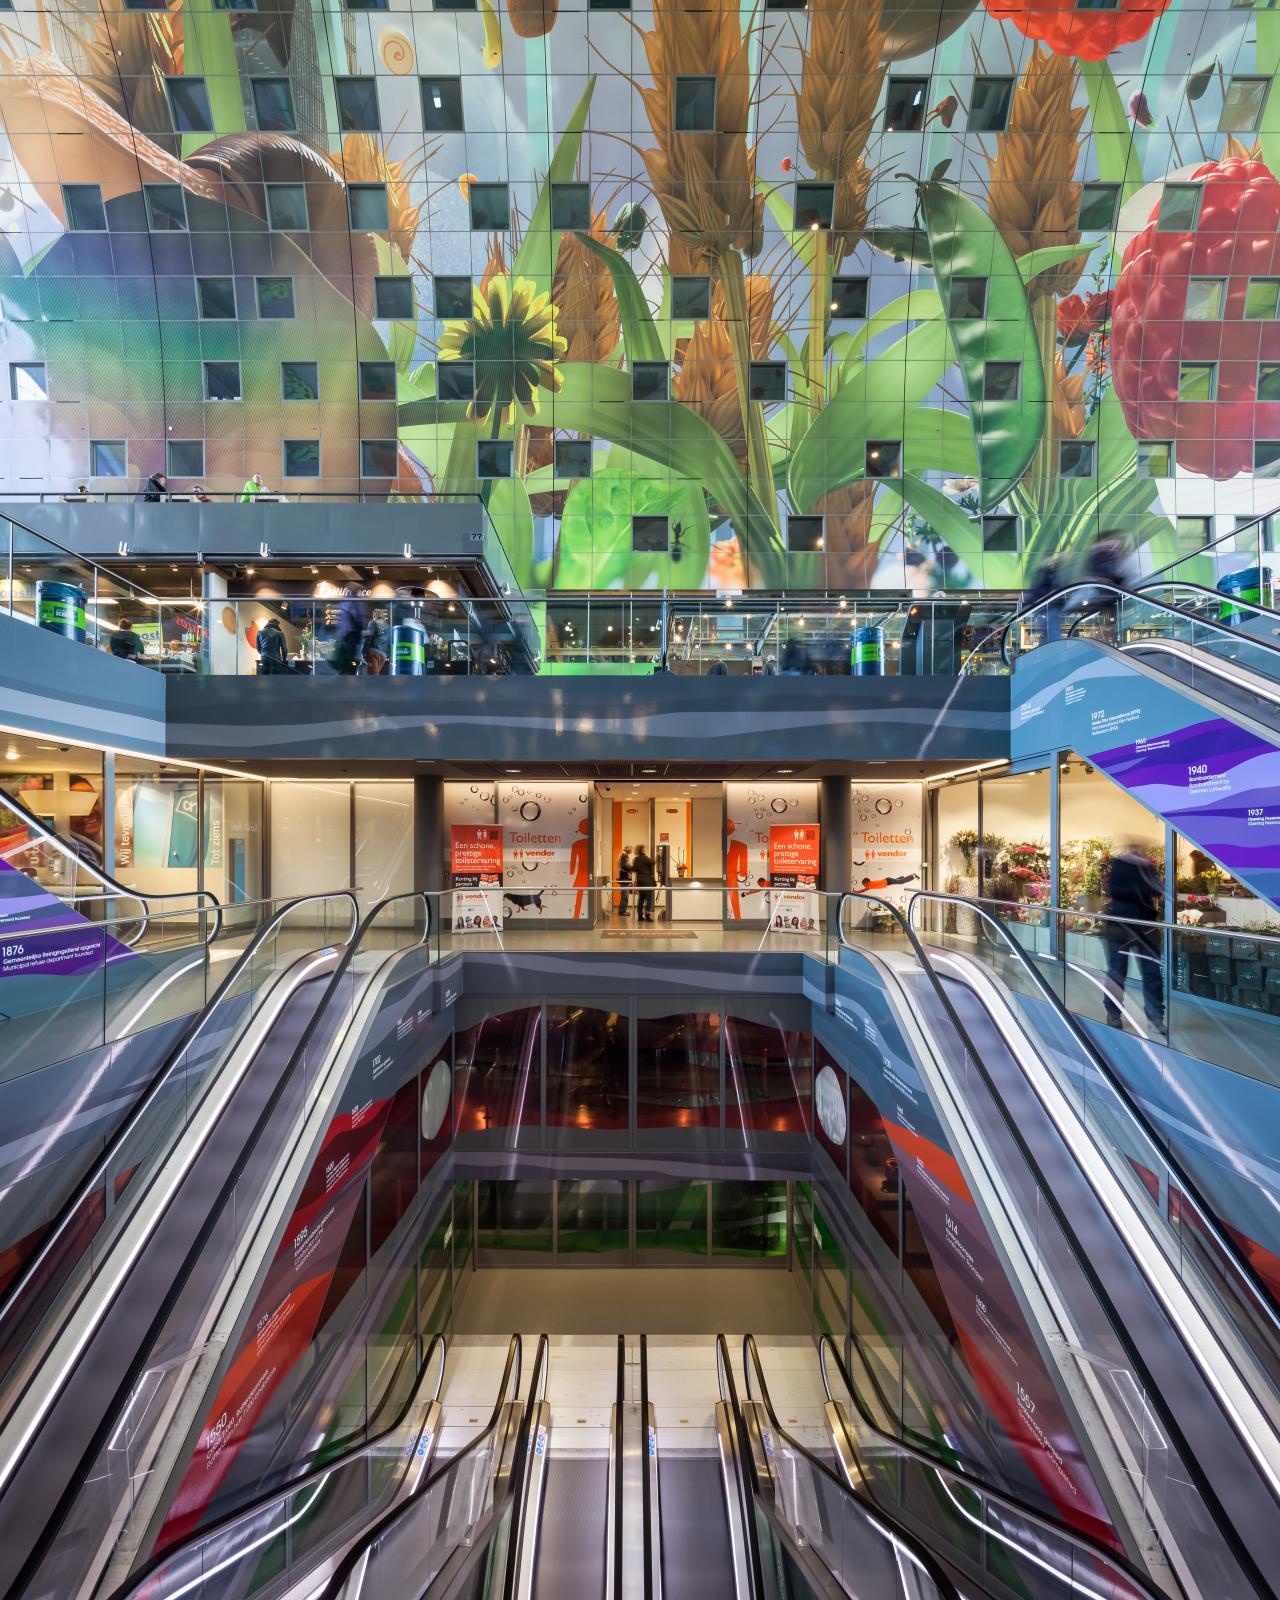 Photograph of Markthal Rotterdam, designed by MVRDV and located in Rotterdam, Netherlands